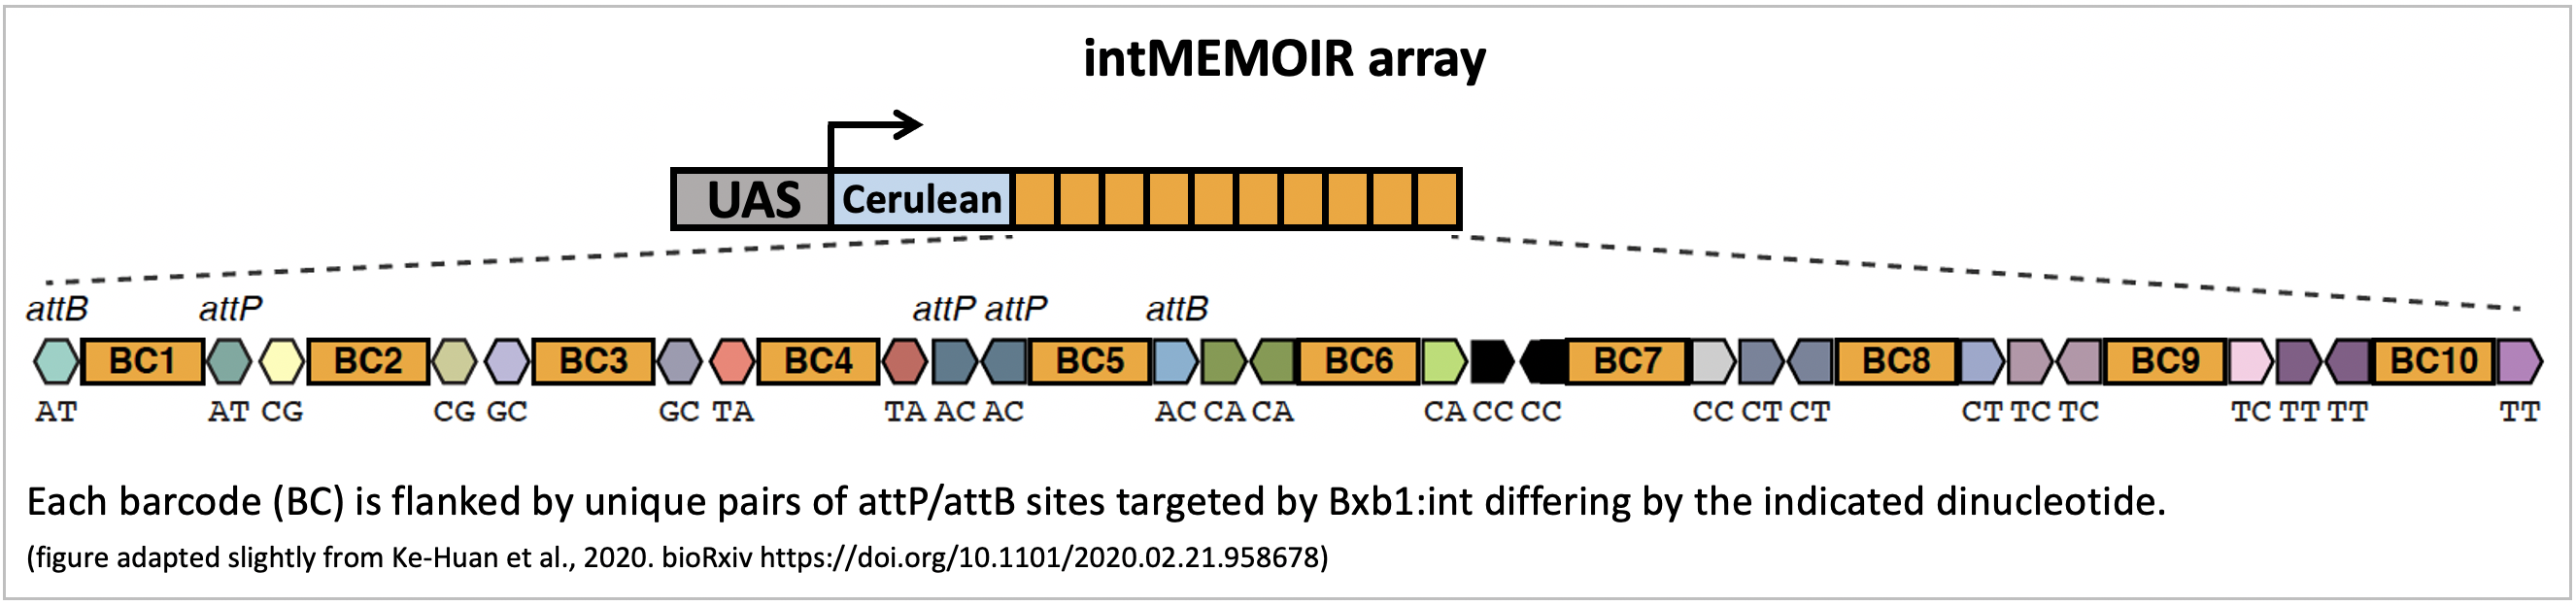 intMEMOIR schematic showing array of barcodes flanked by attB/attP sites